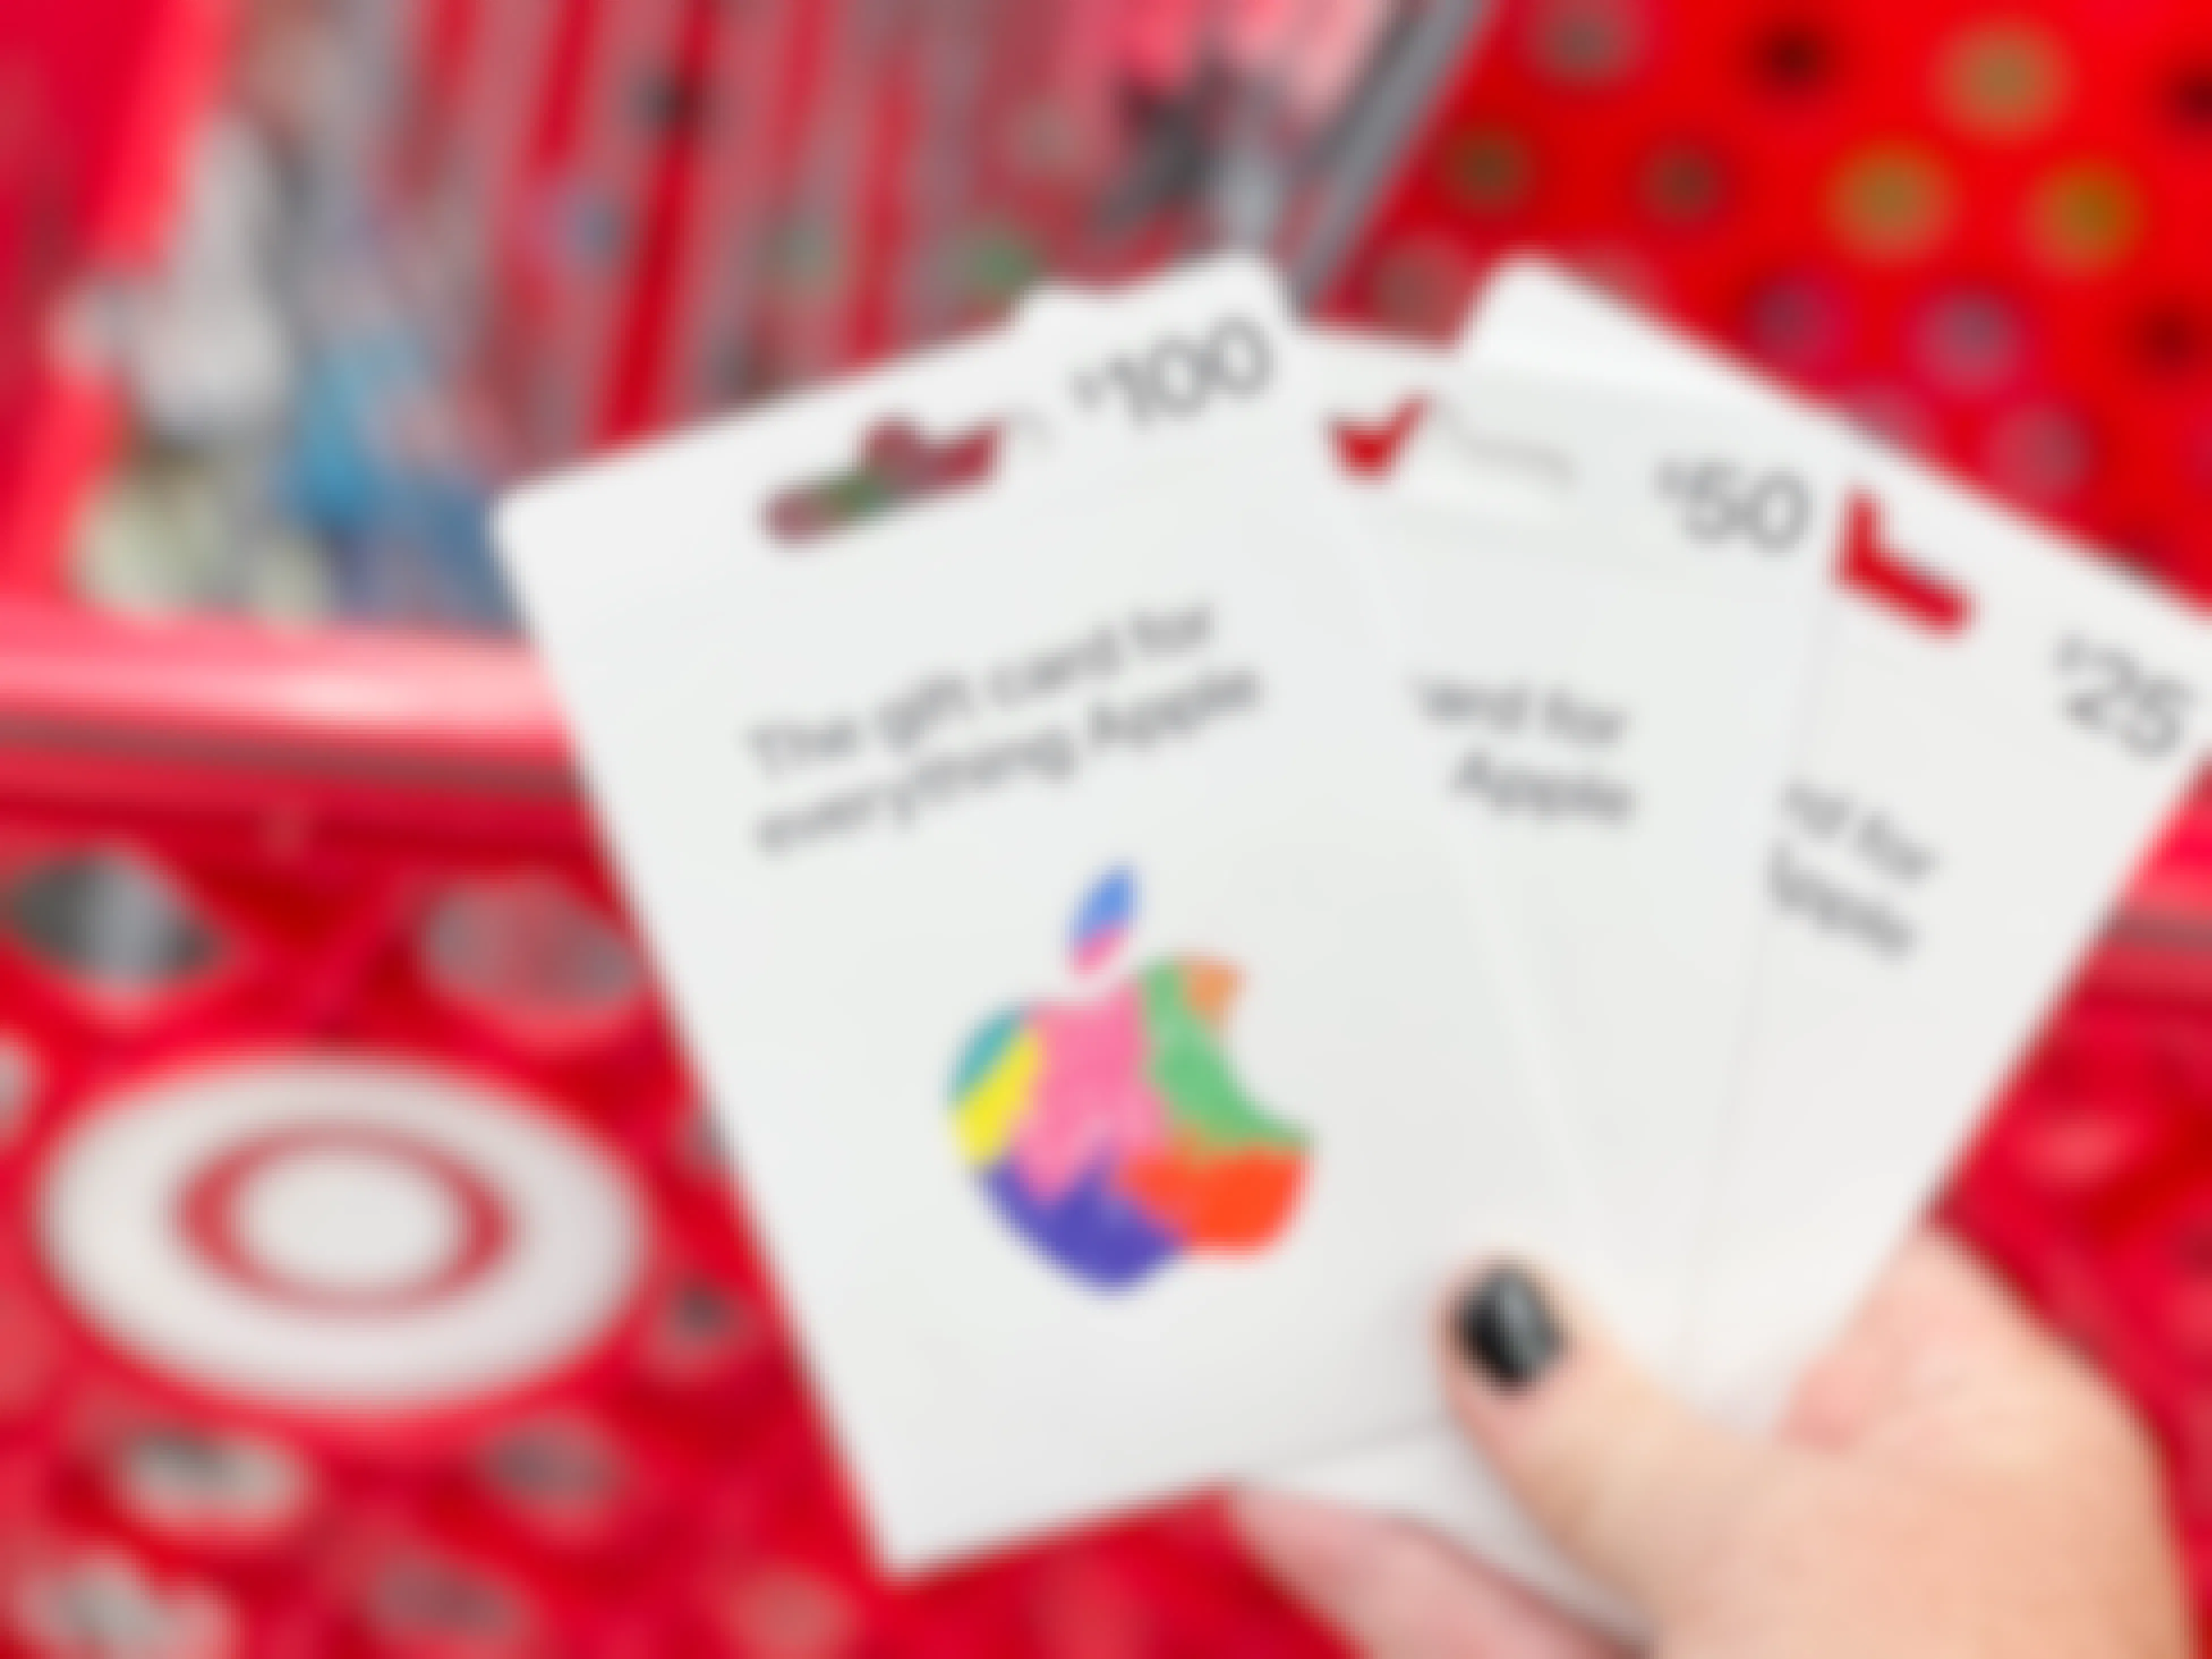 A person's hand holding up three Apple gift cards in front of a Target shopping cart.